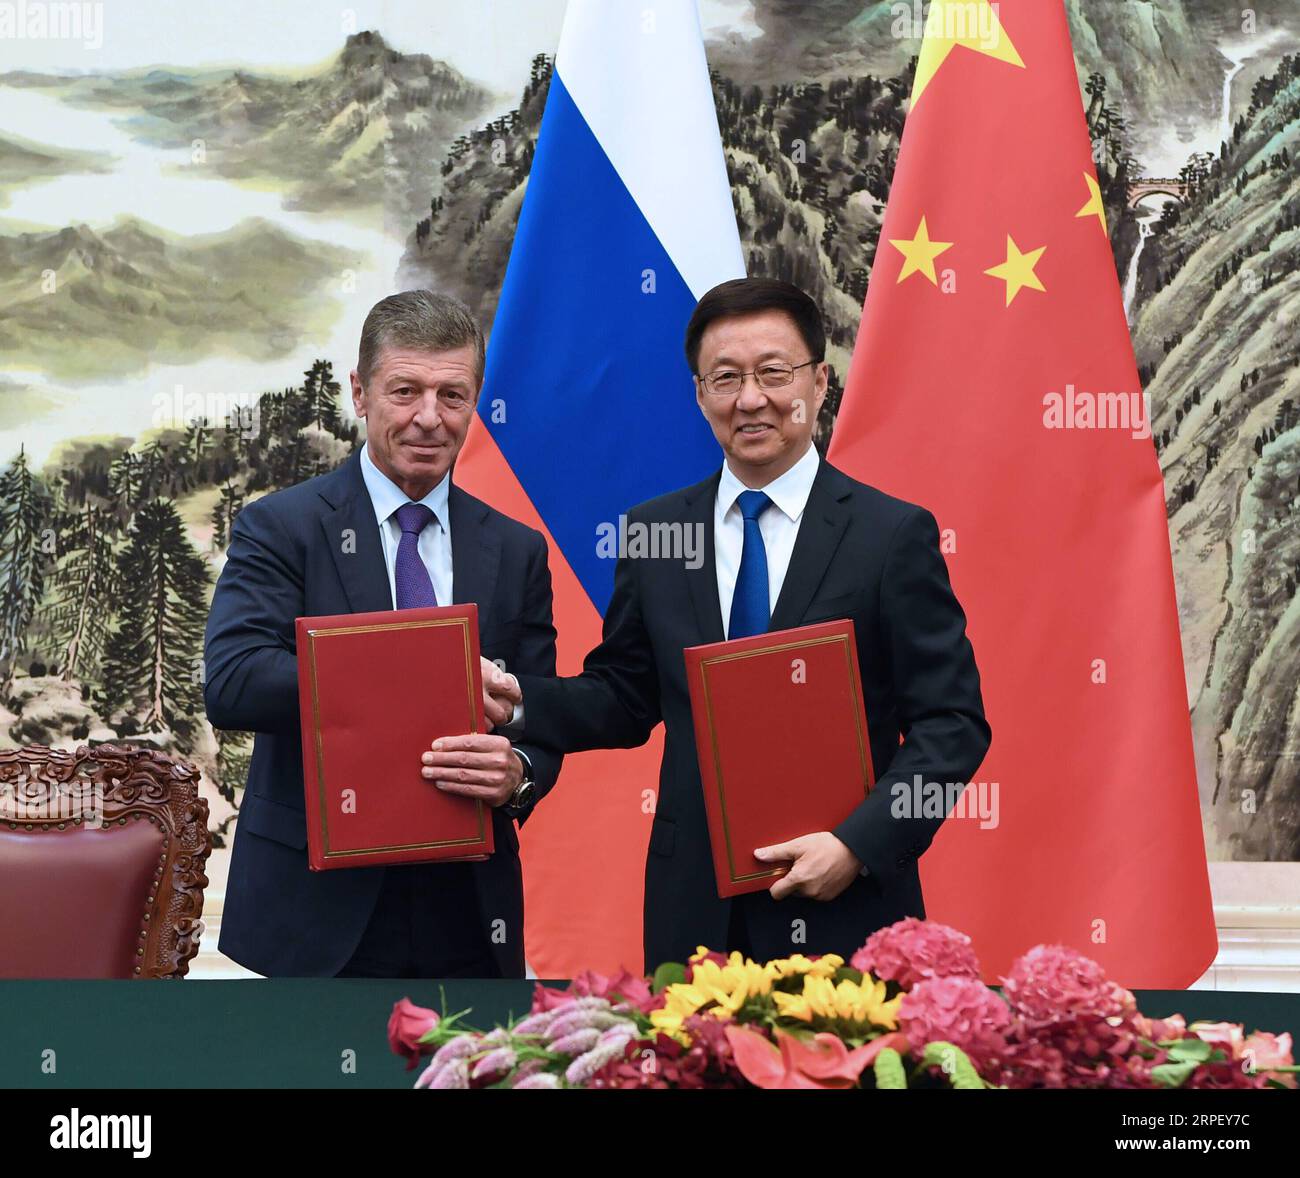 190906 -- BEIJING, Sept. 6, 2019 -- Chinese Vice Premier Han Zheng, also a member of the Standing Committee of the Political Bureau of the Communist Party of China Central Committee, and Russian Deputy Prime Minister Dmitry Kozak sign the summary of minutes of the 16th meeting of the China-Russia Energy Cooperation Committee in Beijing, capital of China, Sept. 6, 2019. Han met with Kozak in Beijing on Friday and co-chaired the meeting with him.  CHINA-BEIJING-HAN ZHENG-DMITRY KOZAK-MEETING CN RaoxAimin PUBLICATIONxNOTxINxCHN Stock Photo